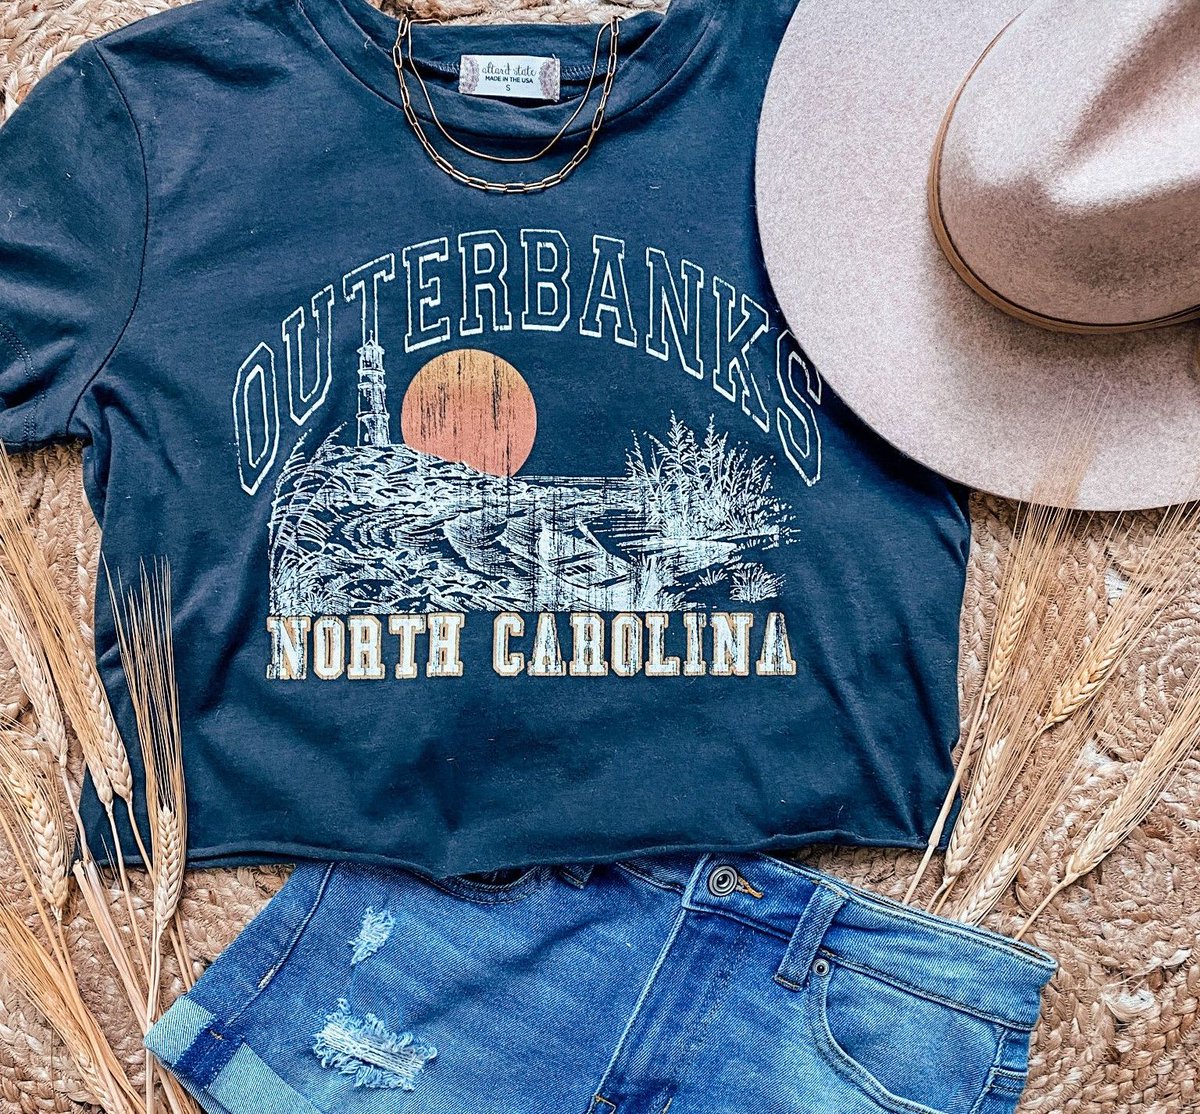 Fridays are for watching Outer Banks 🤩 Who else is watching this weekend? 🙋 #altardstate #standoutforgood #outerbanks #outerbanksseason2 #outerbankstop #outerbanksshirt #fridayfeels #fridaymood #fridayvibes #weekendmood #weekendoutfit